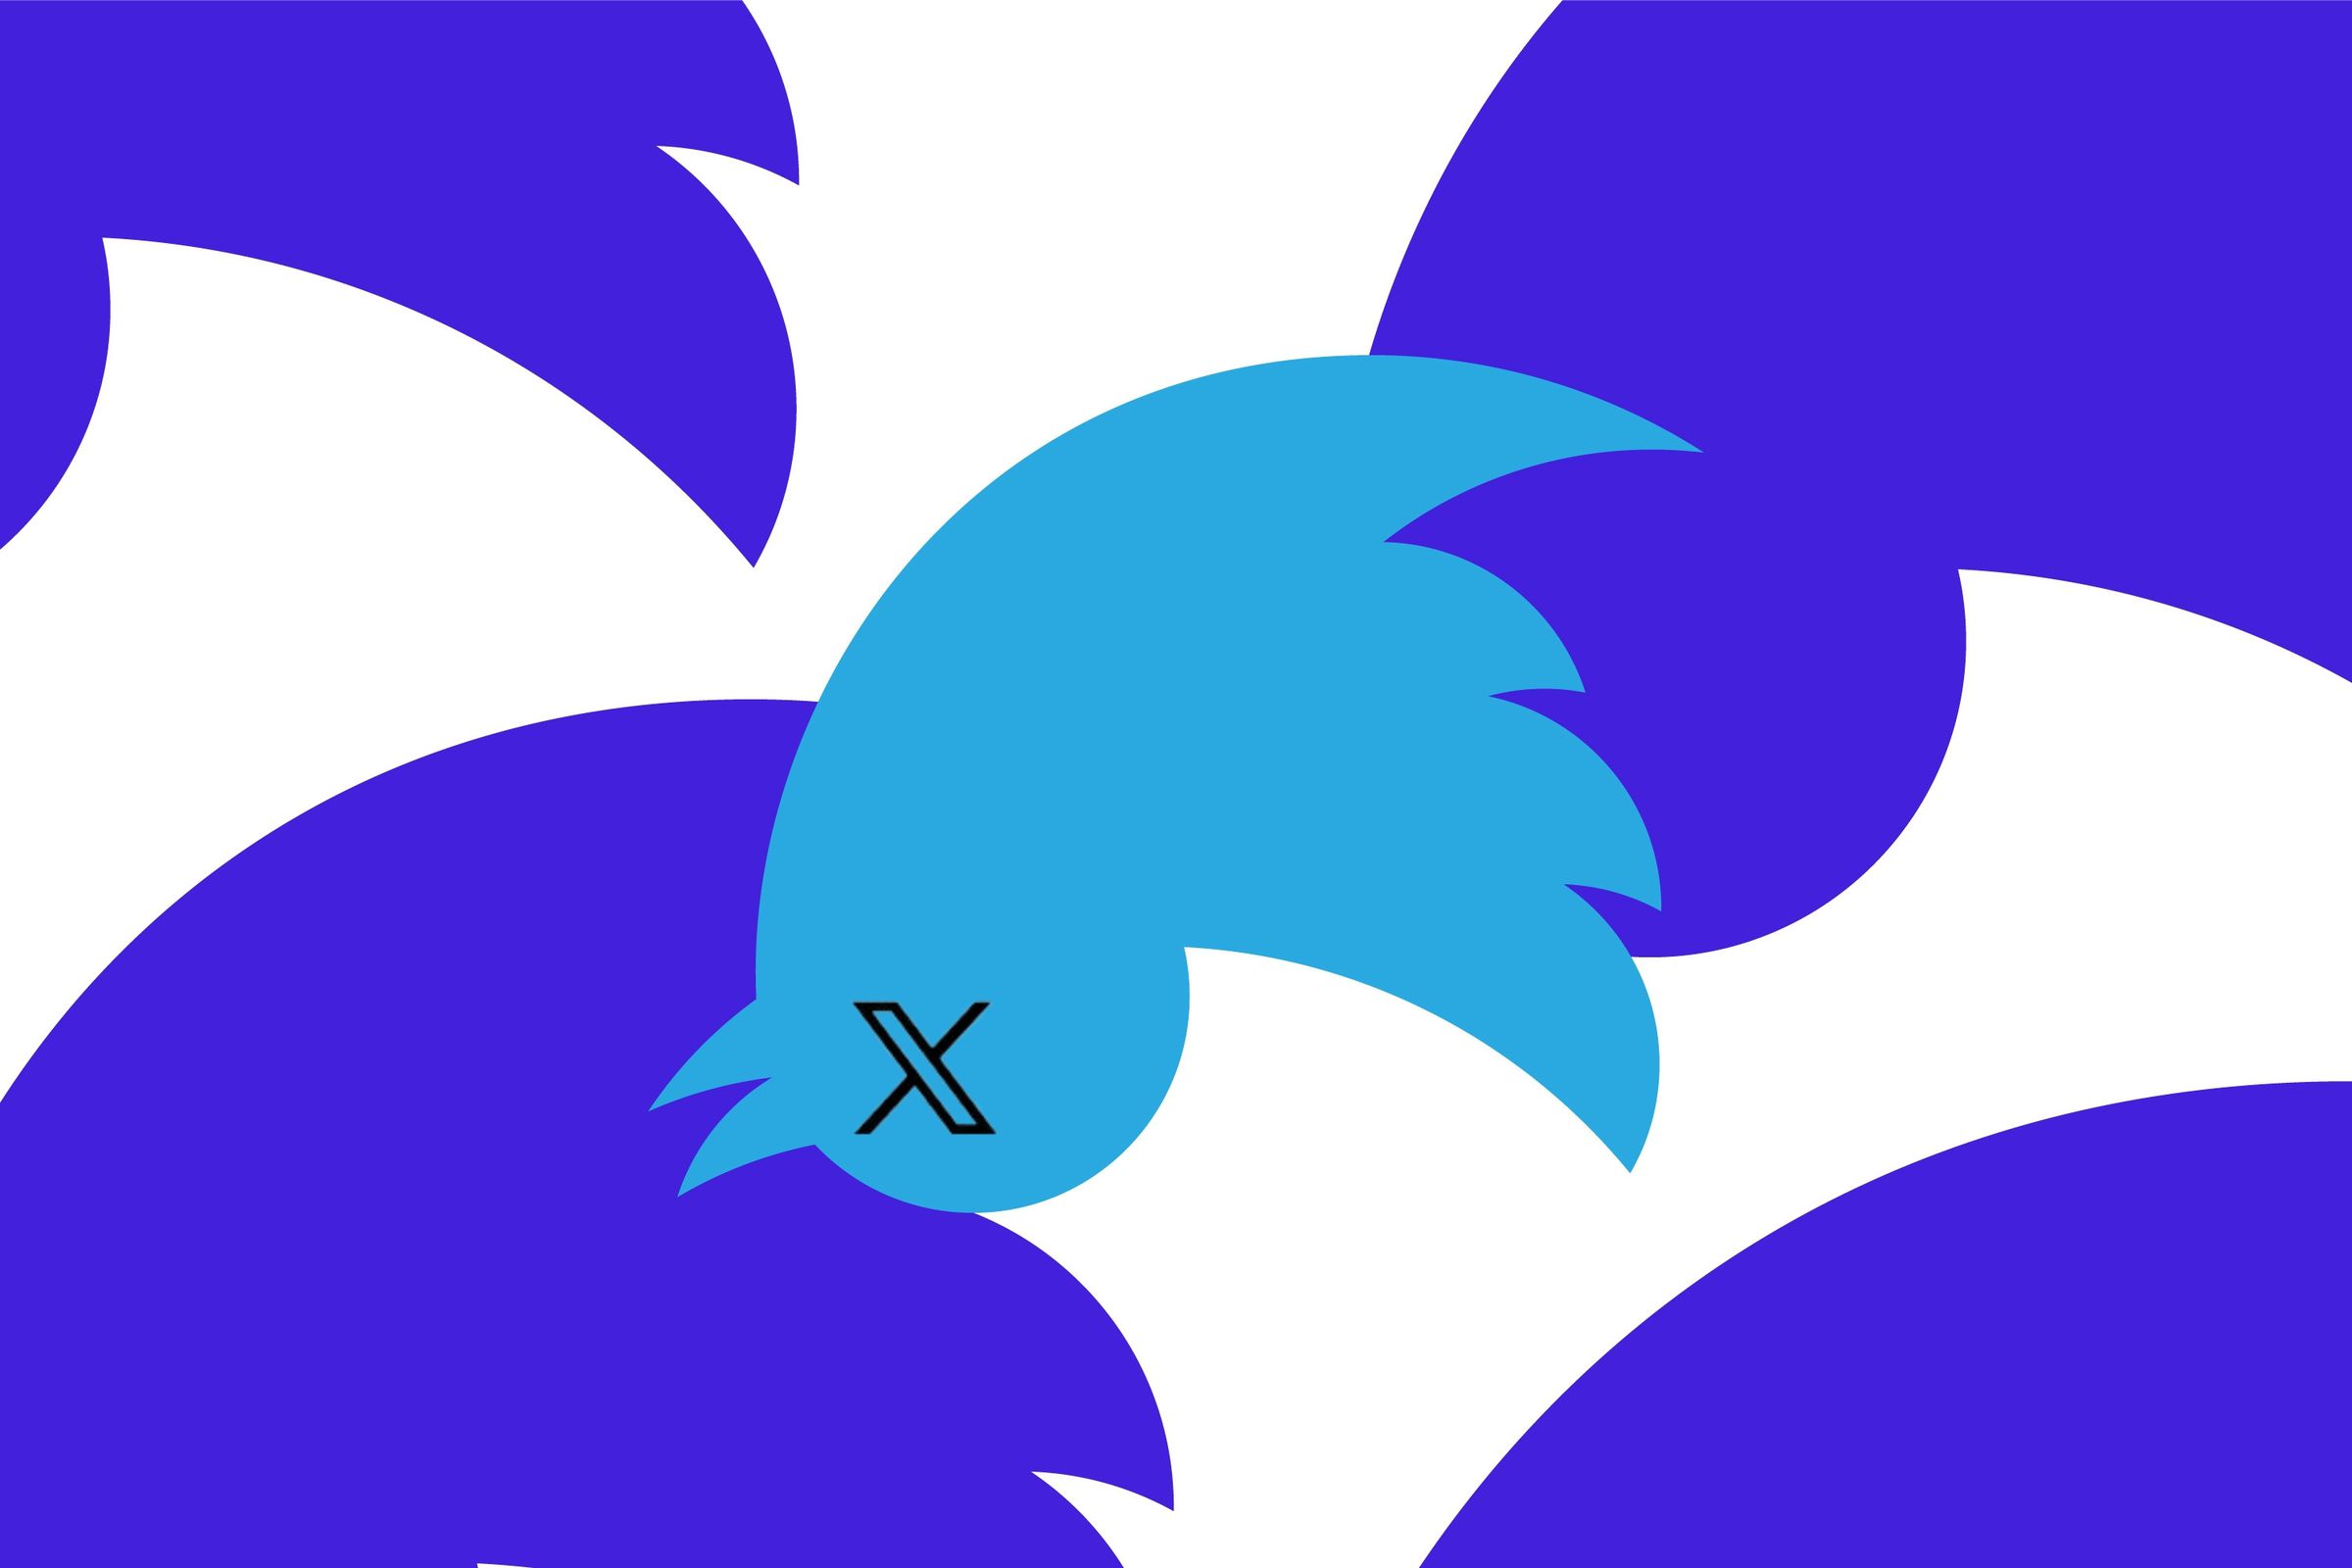 Twitter’s bird logo, upside down, with its new X logo placed over the eyes.